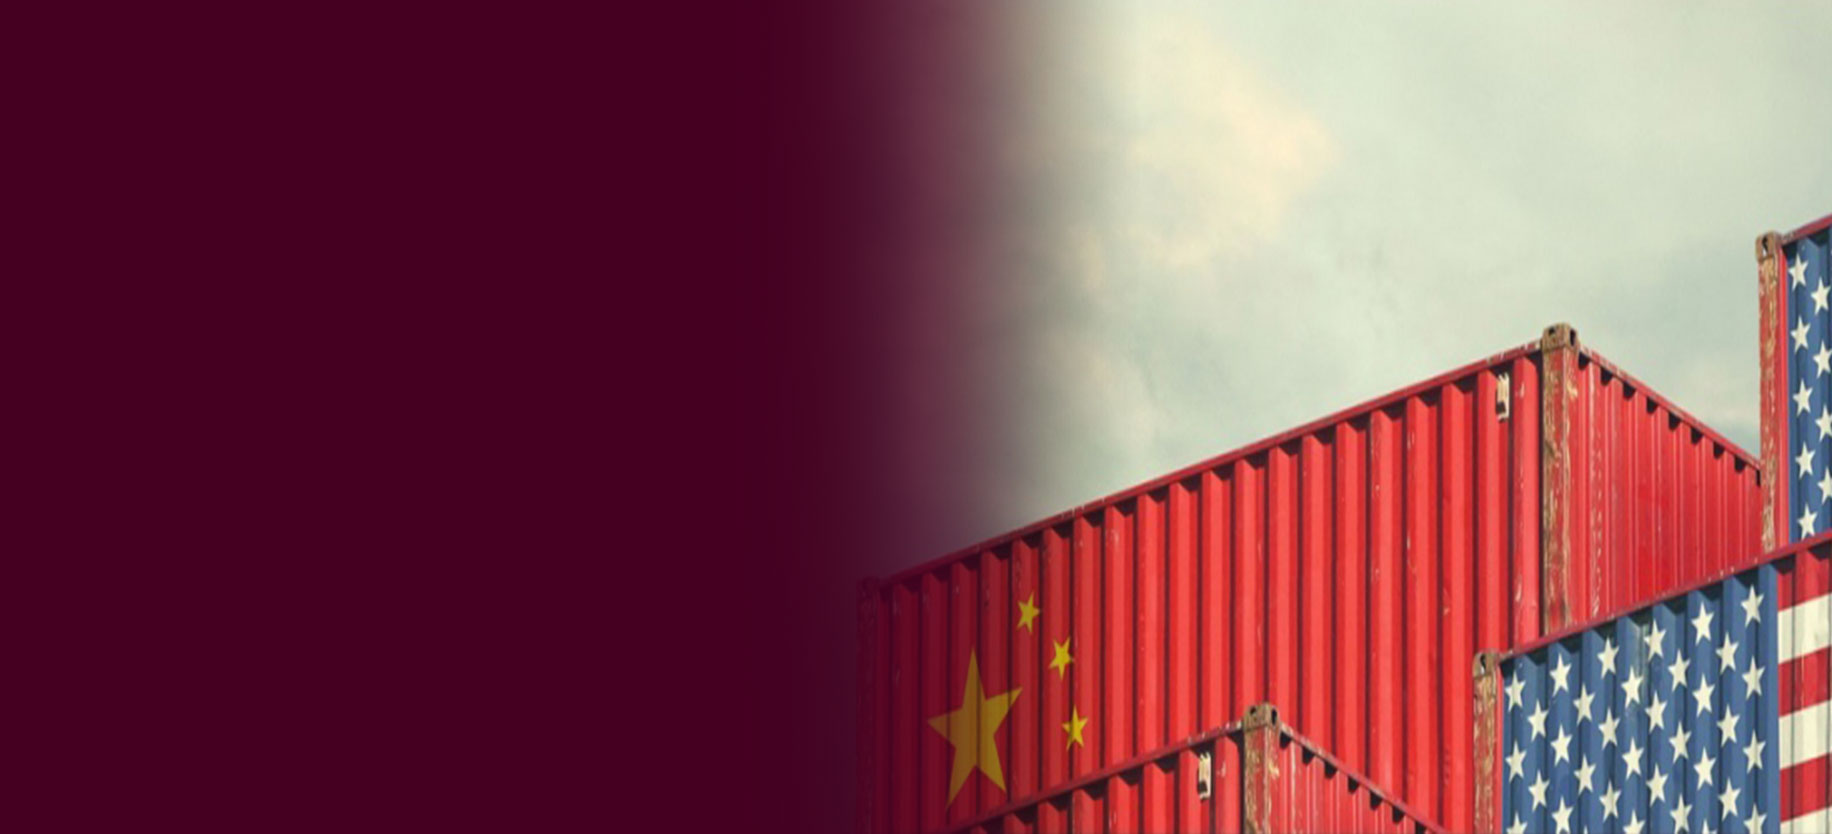 Cargo containers painted with U.S. and China flags